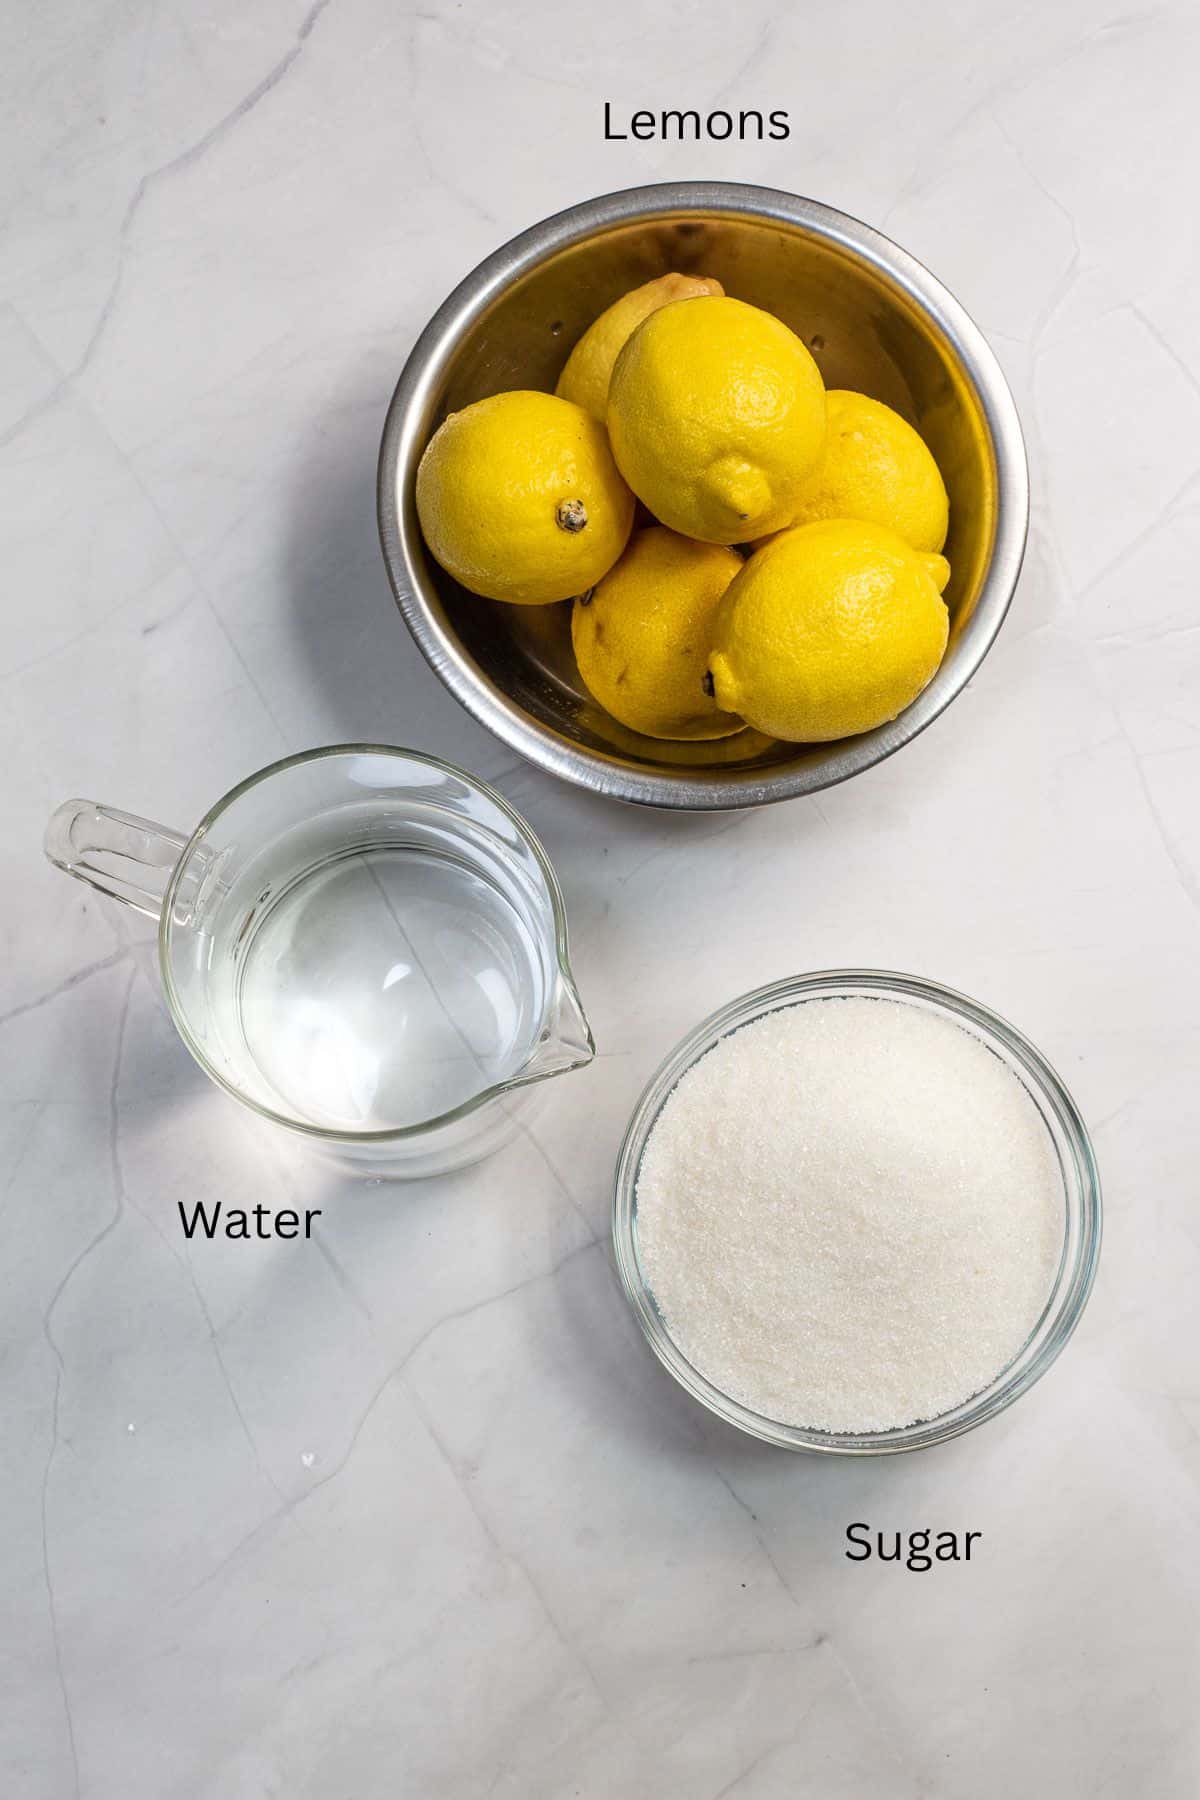 A bowl of lemons, a pitcher of water and a bowl of sugar against a marble background.